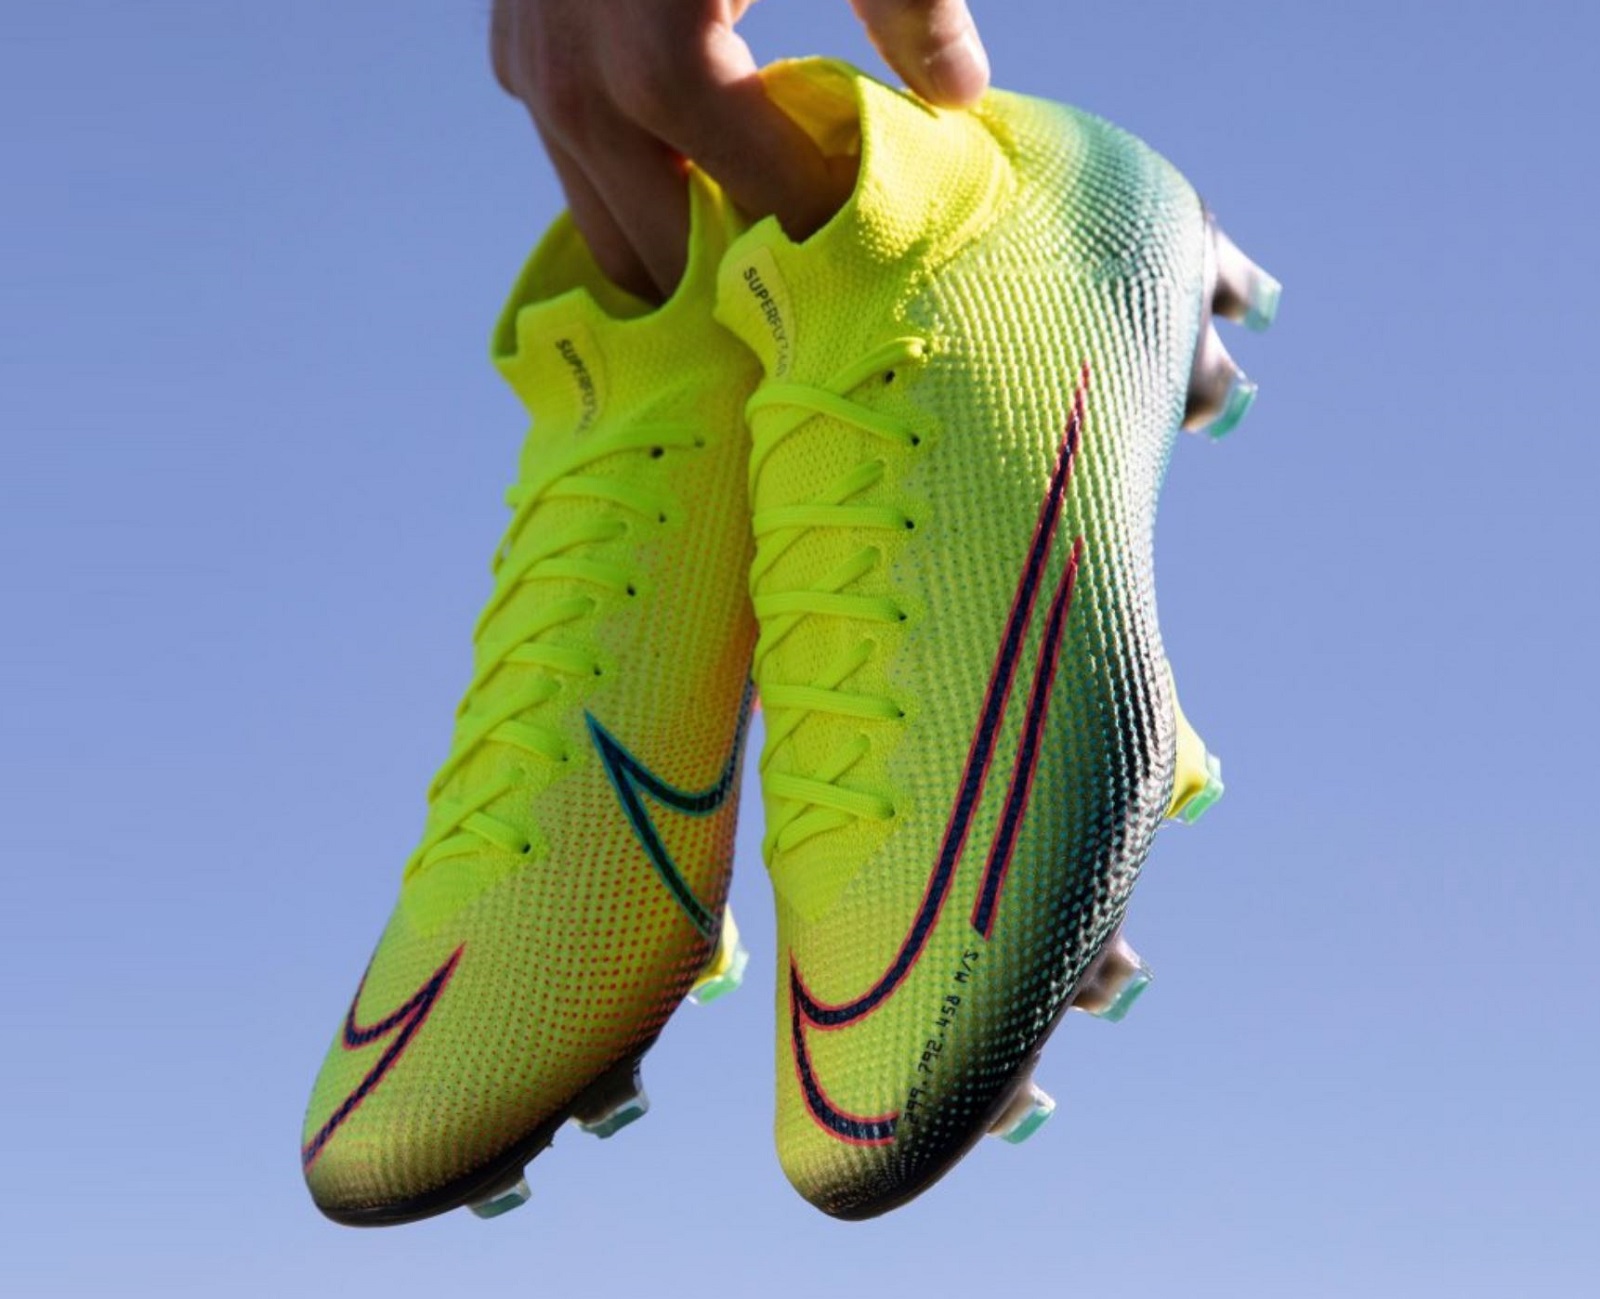 soccer cleats for speed